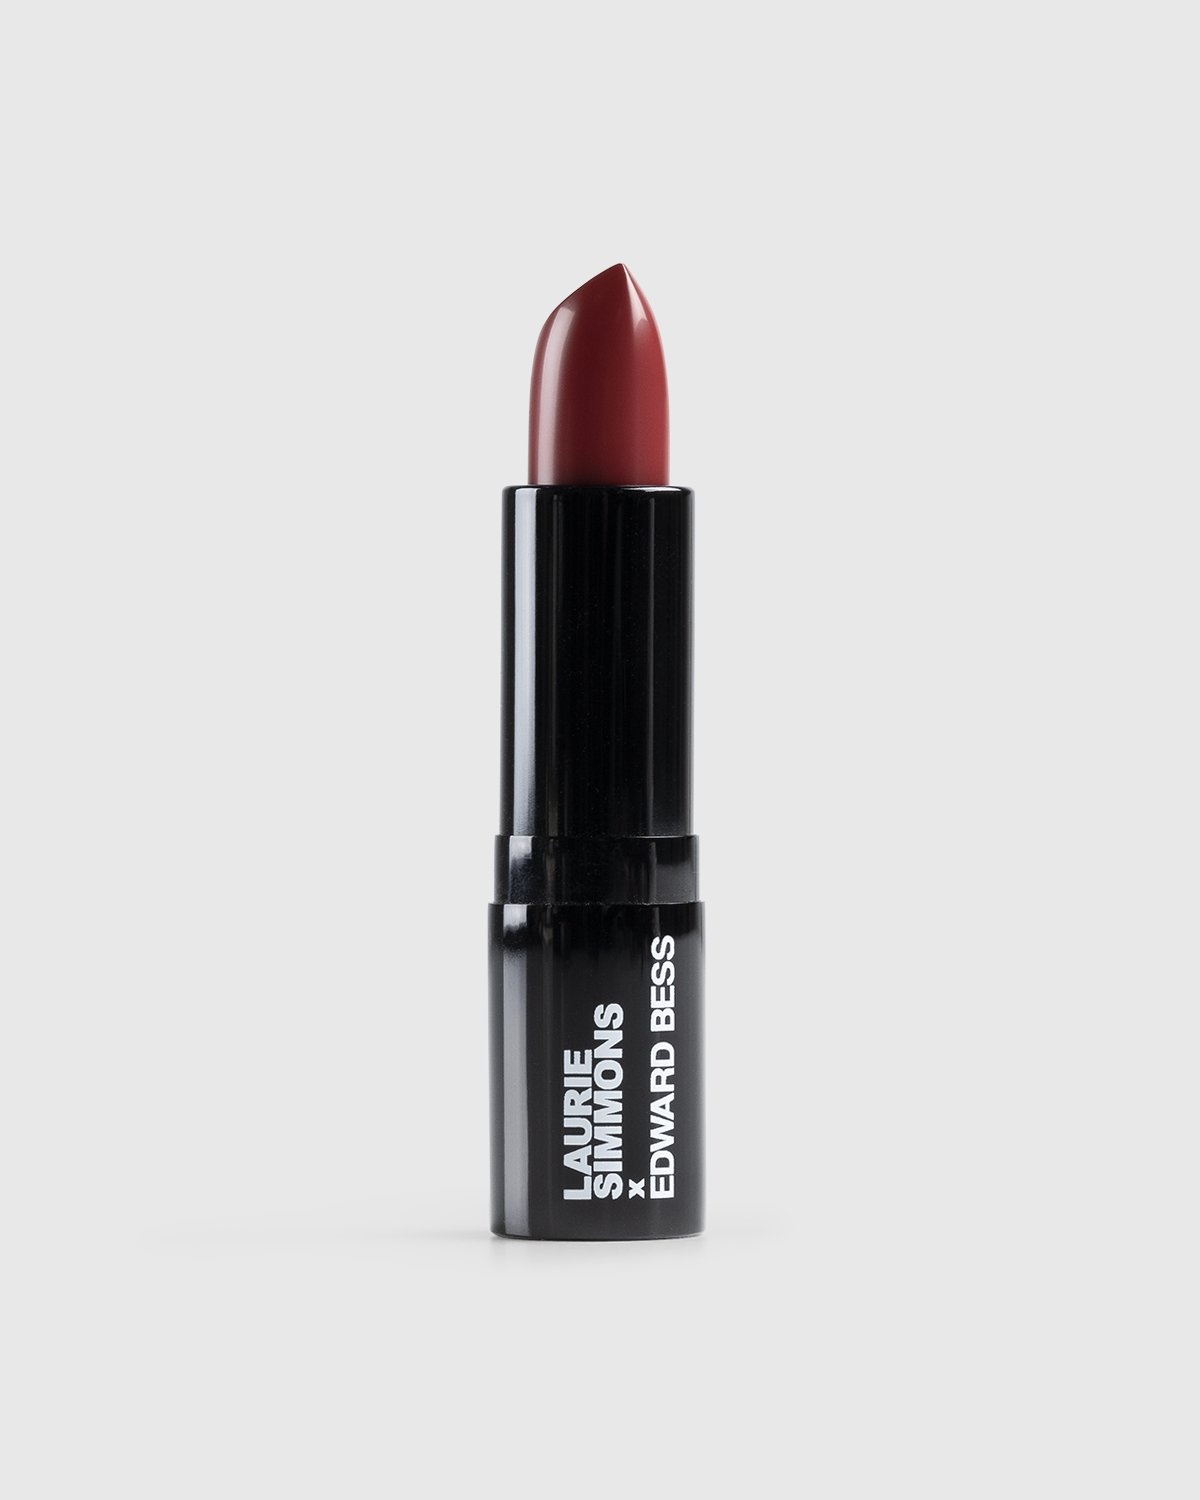 Laurie Simmons x Edward Bess x Highsnobiety – Lipstick - Cosmetics - Red - Image 1